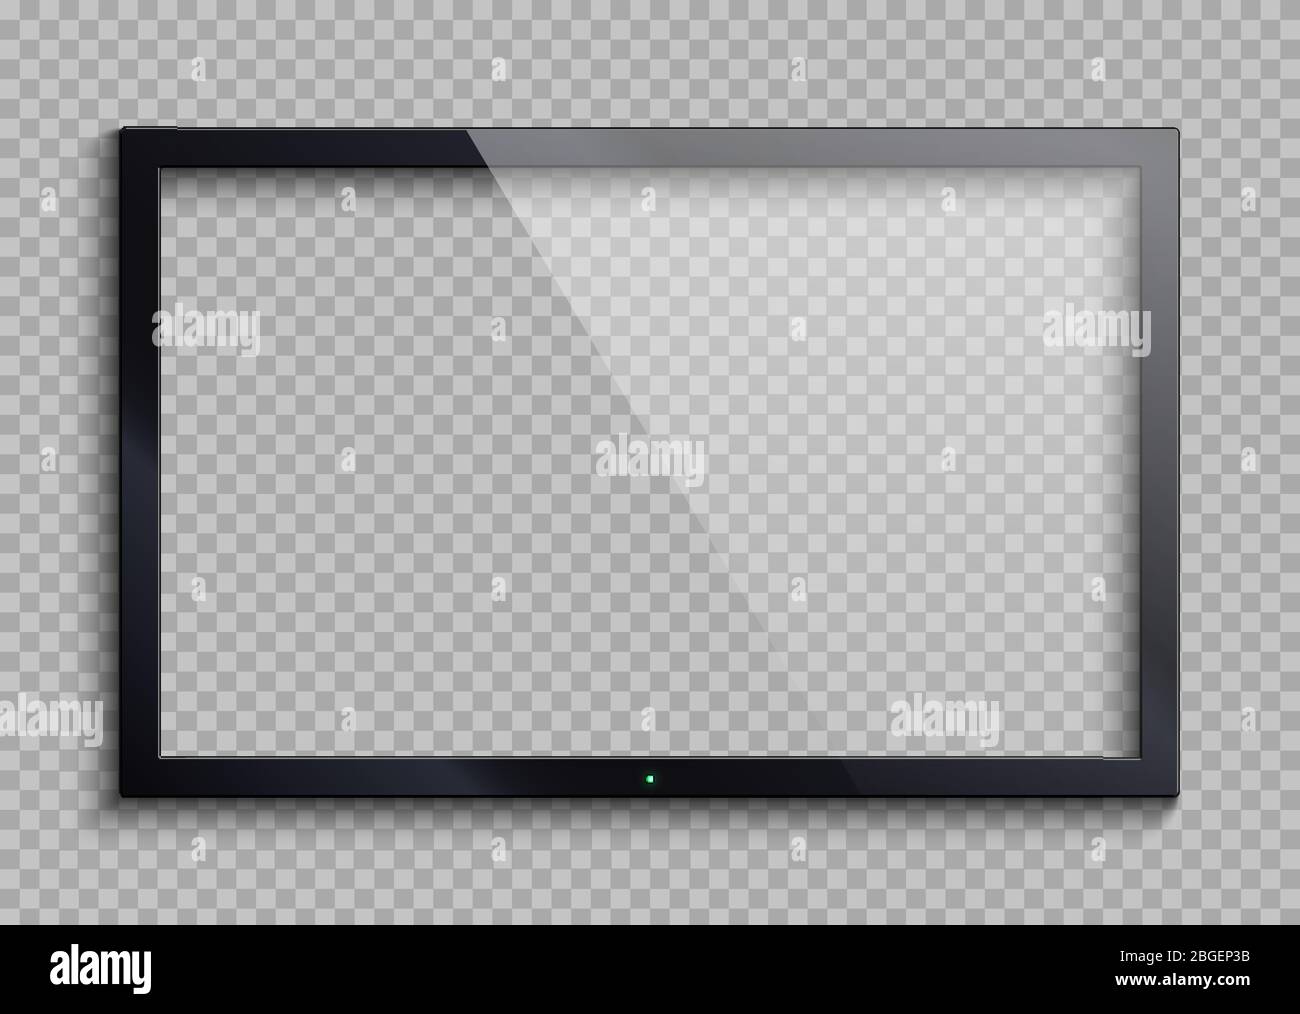 Empty tv frame with reflection and transparency screen isolated. Lcd monitor vector illustration. Lcd display screen, tv digital panel plasma Stock Vector